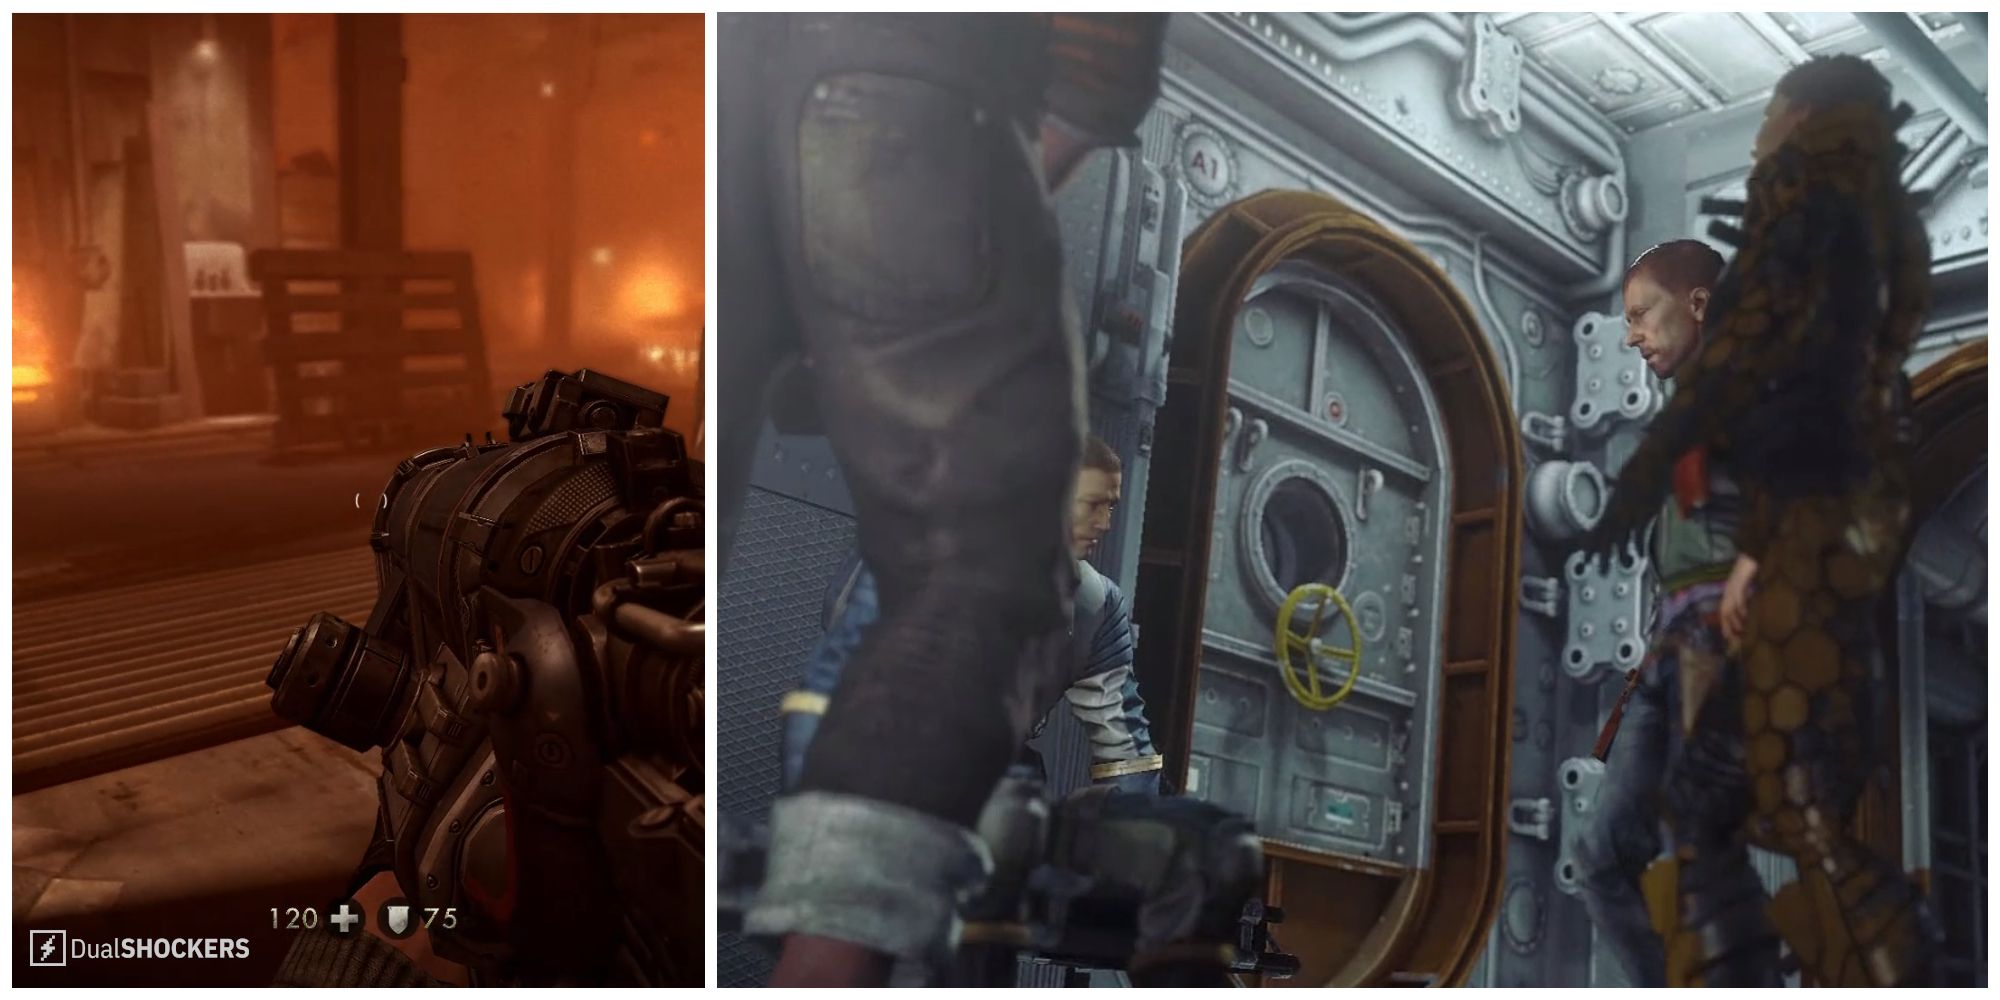 Split image of gameplay inside the Kreisau Circle hideout and Blazkowicz, Caroline, Max, and Fergus preparing to go to Deathshead's Compound in Wolfenstein: The New Order.